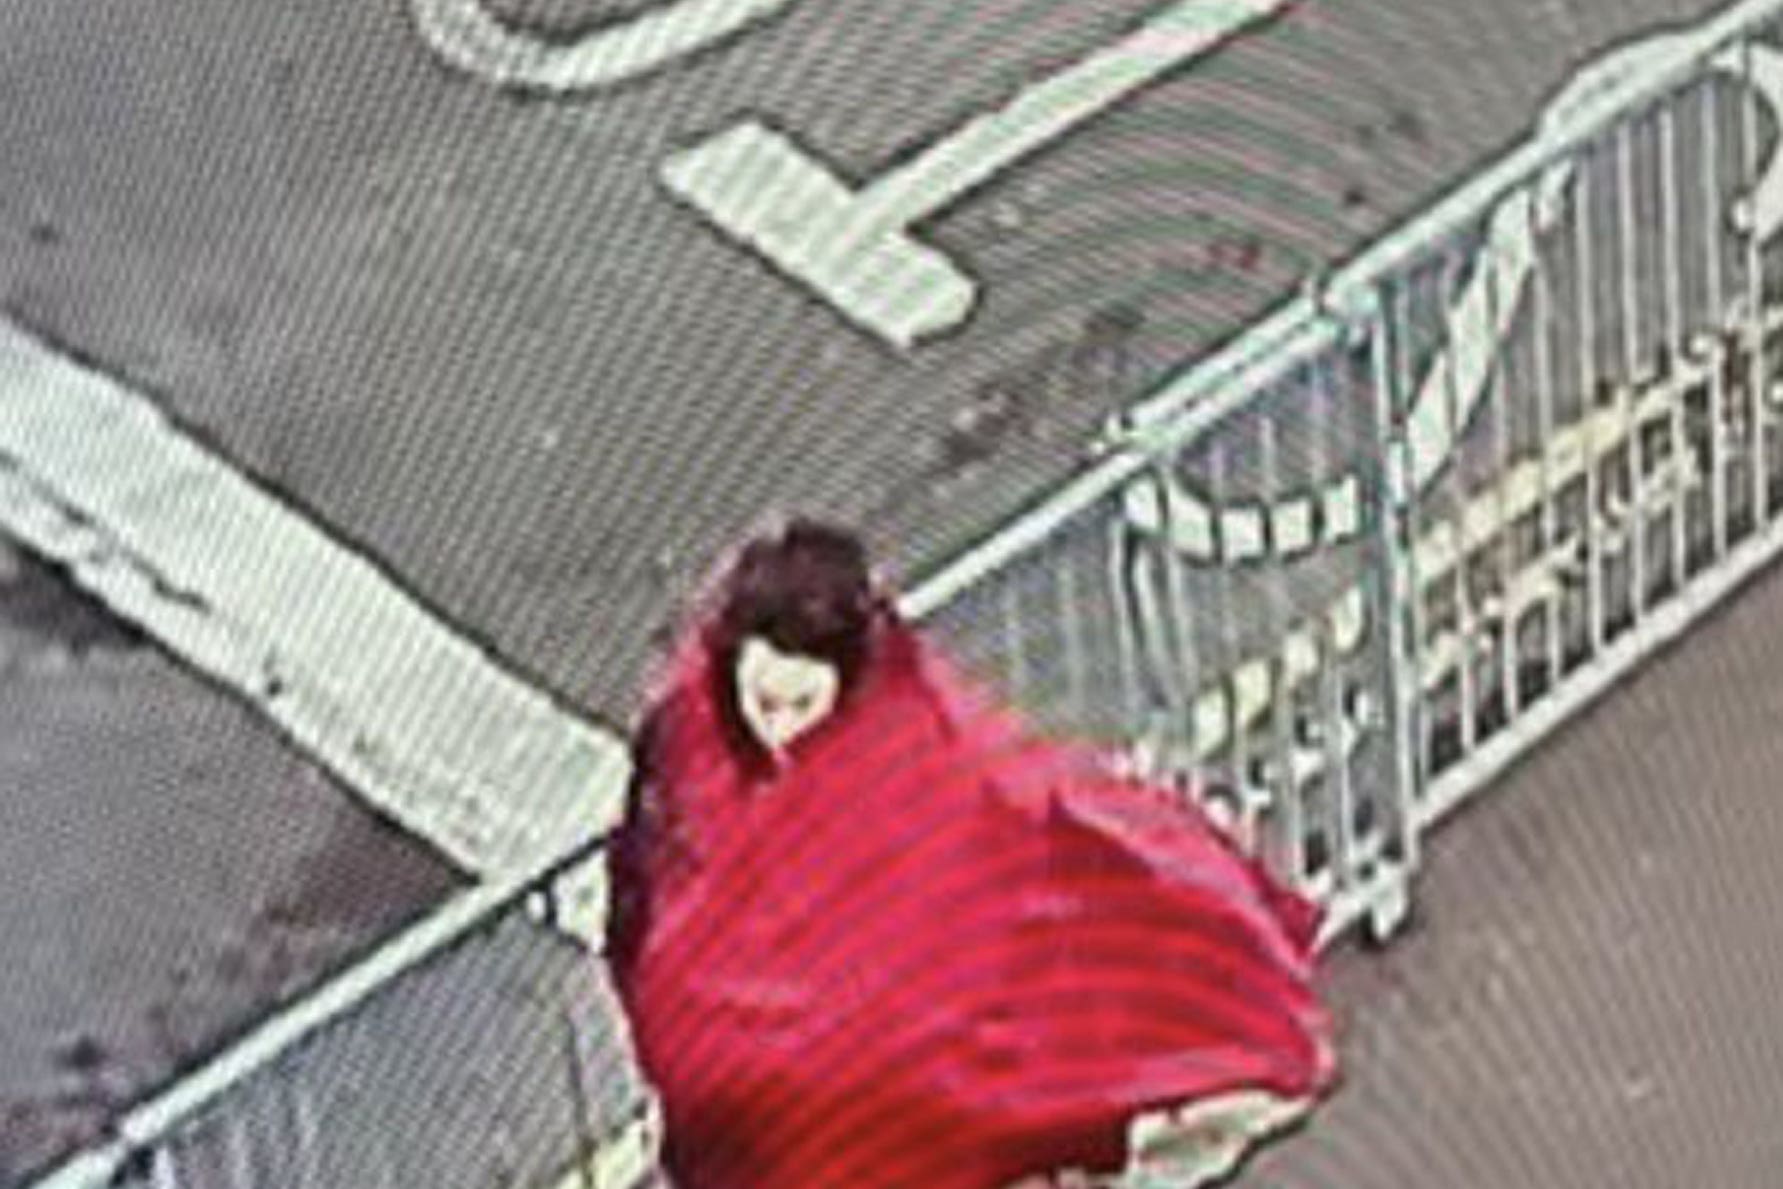 A CCTV image which is believed to be Constance Marten outside Harwich Port in Essex on Saturday